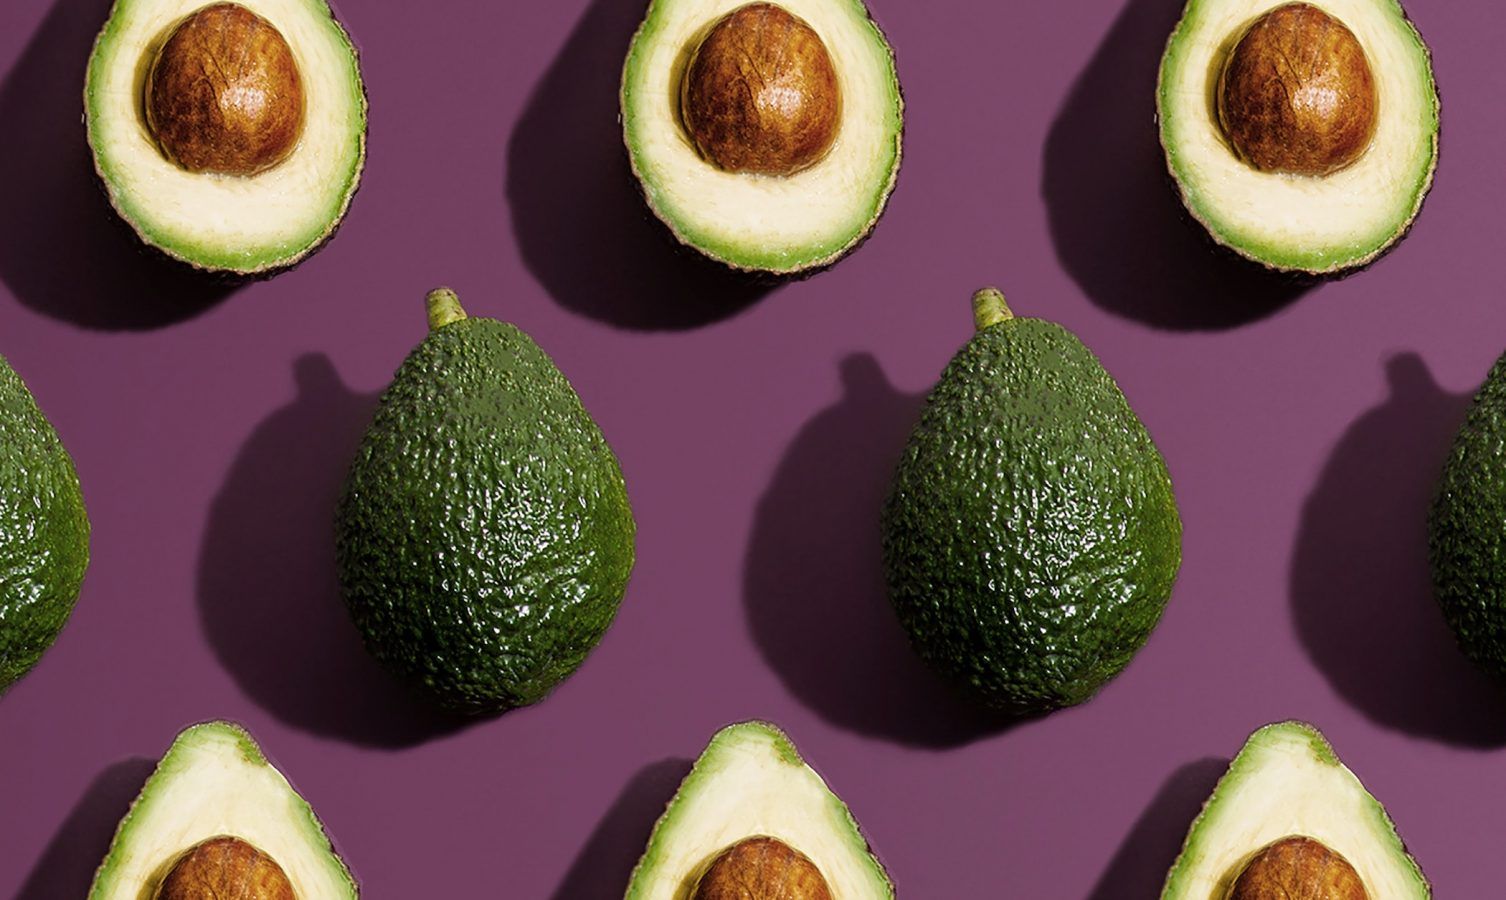 How to choose the perfect avocado, and how to ripen it quickly